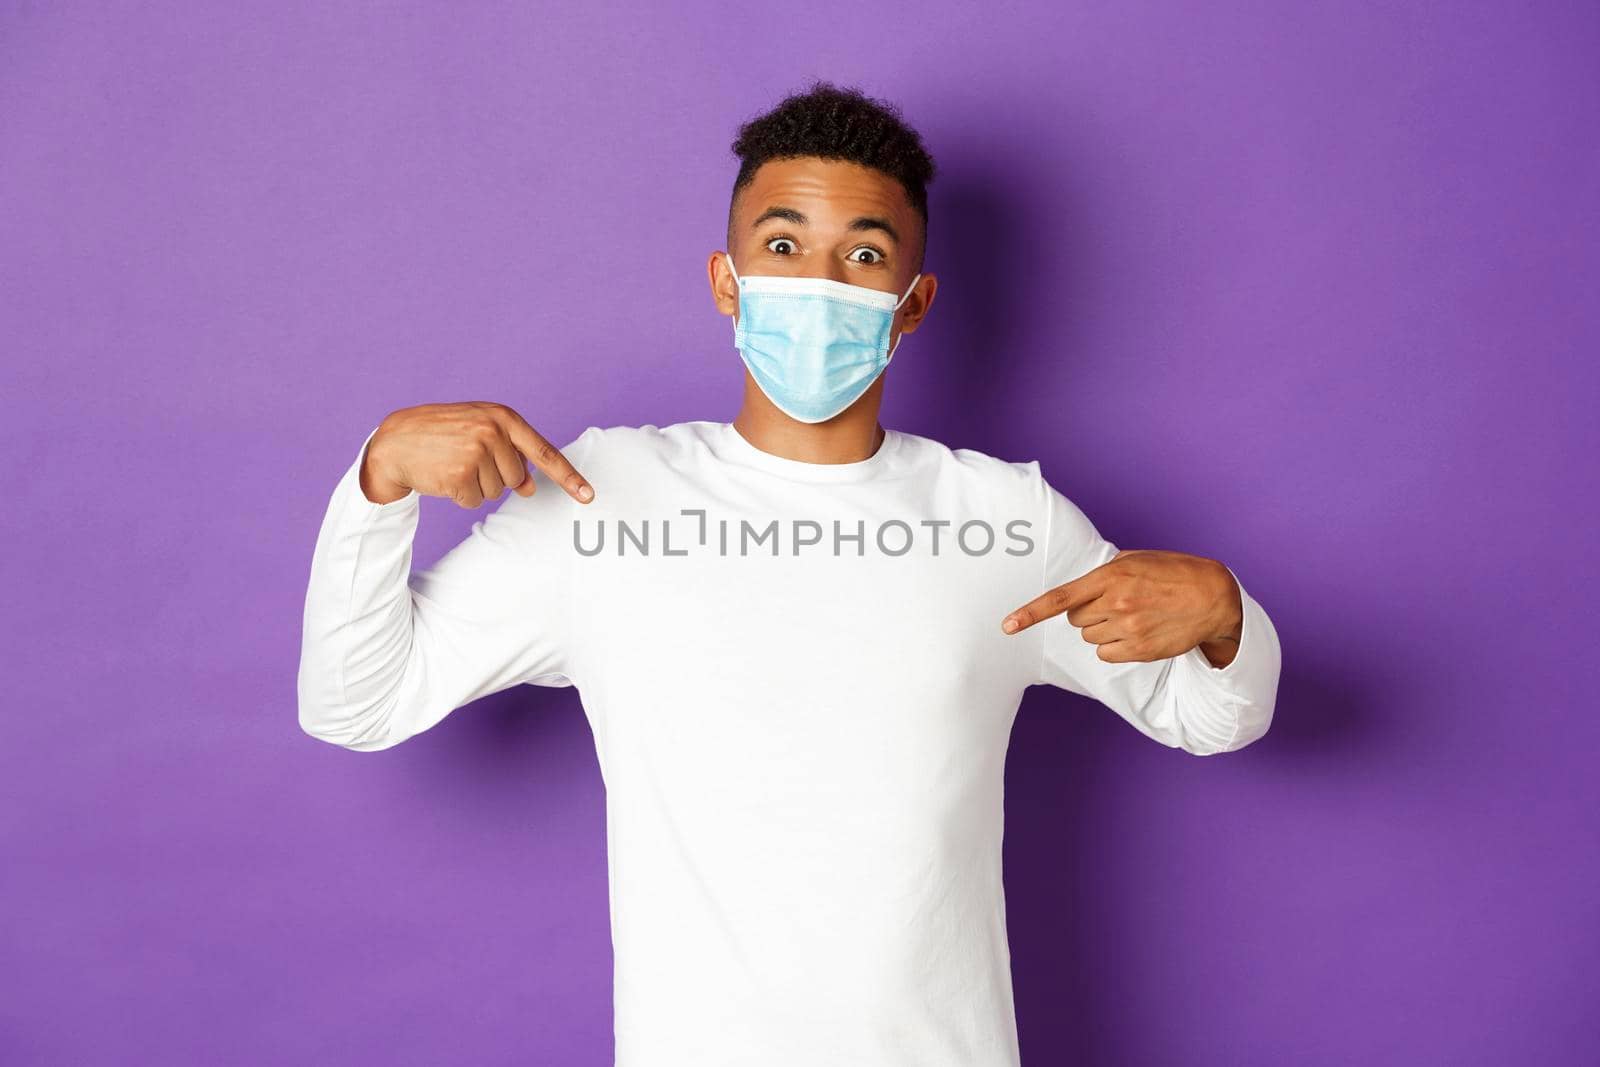 Concept of coronavirus, quarantine and lifestyle. Excited african-american guy in medical mask, pointing fingers at logo on center and looking amazed, standing over purple background.